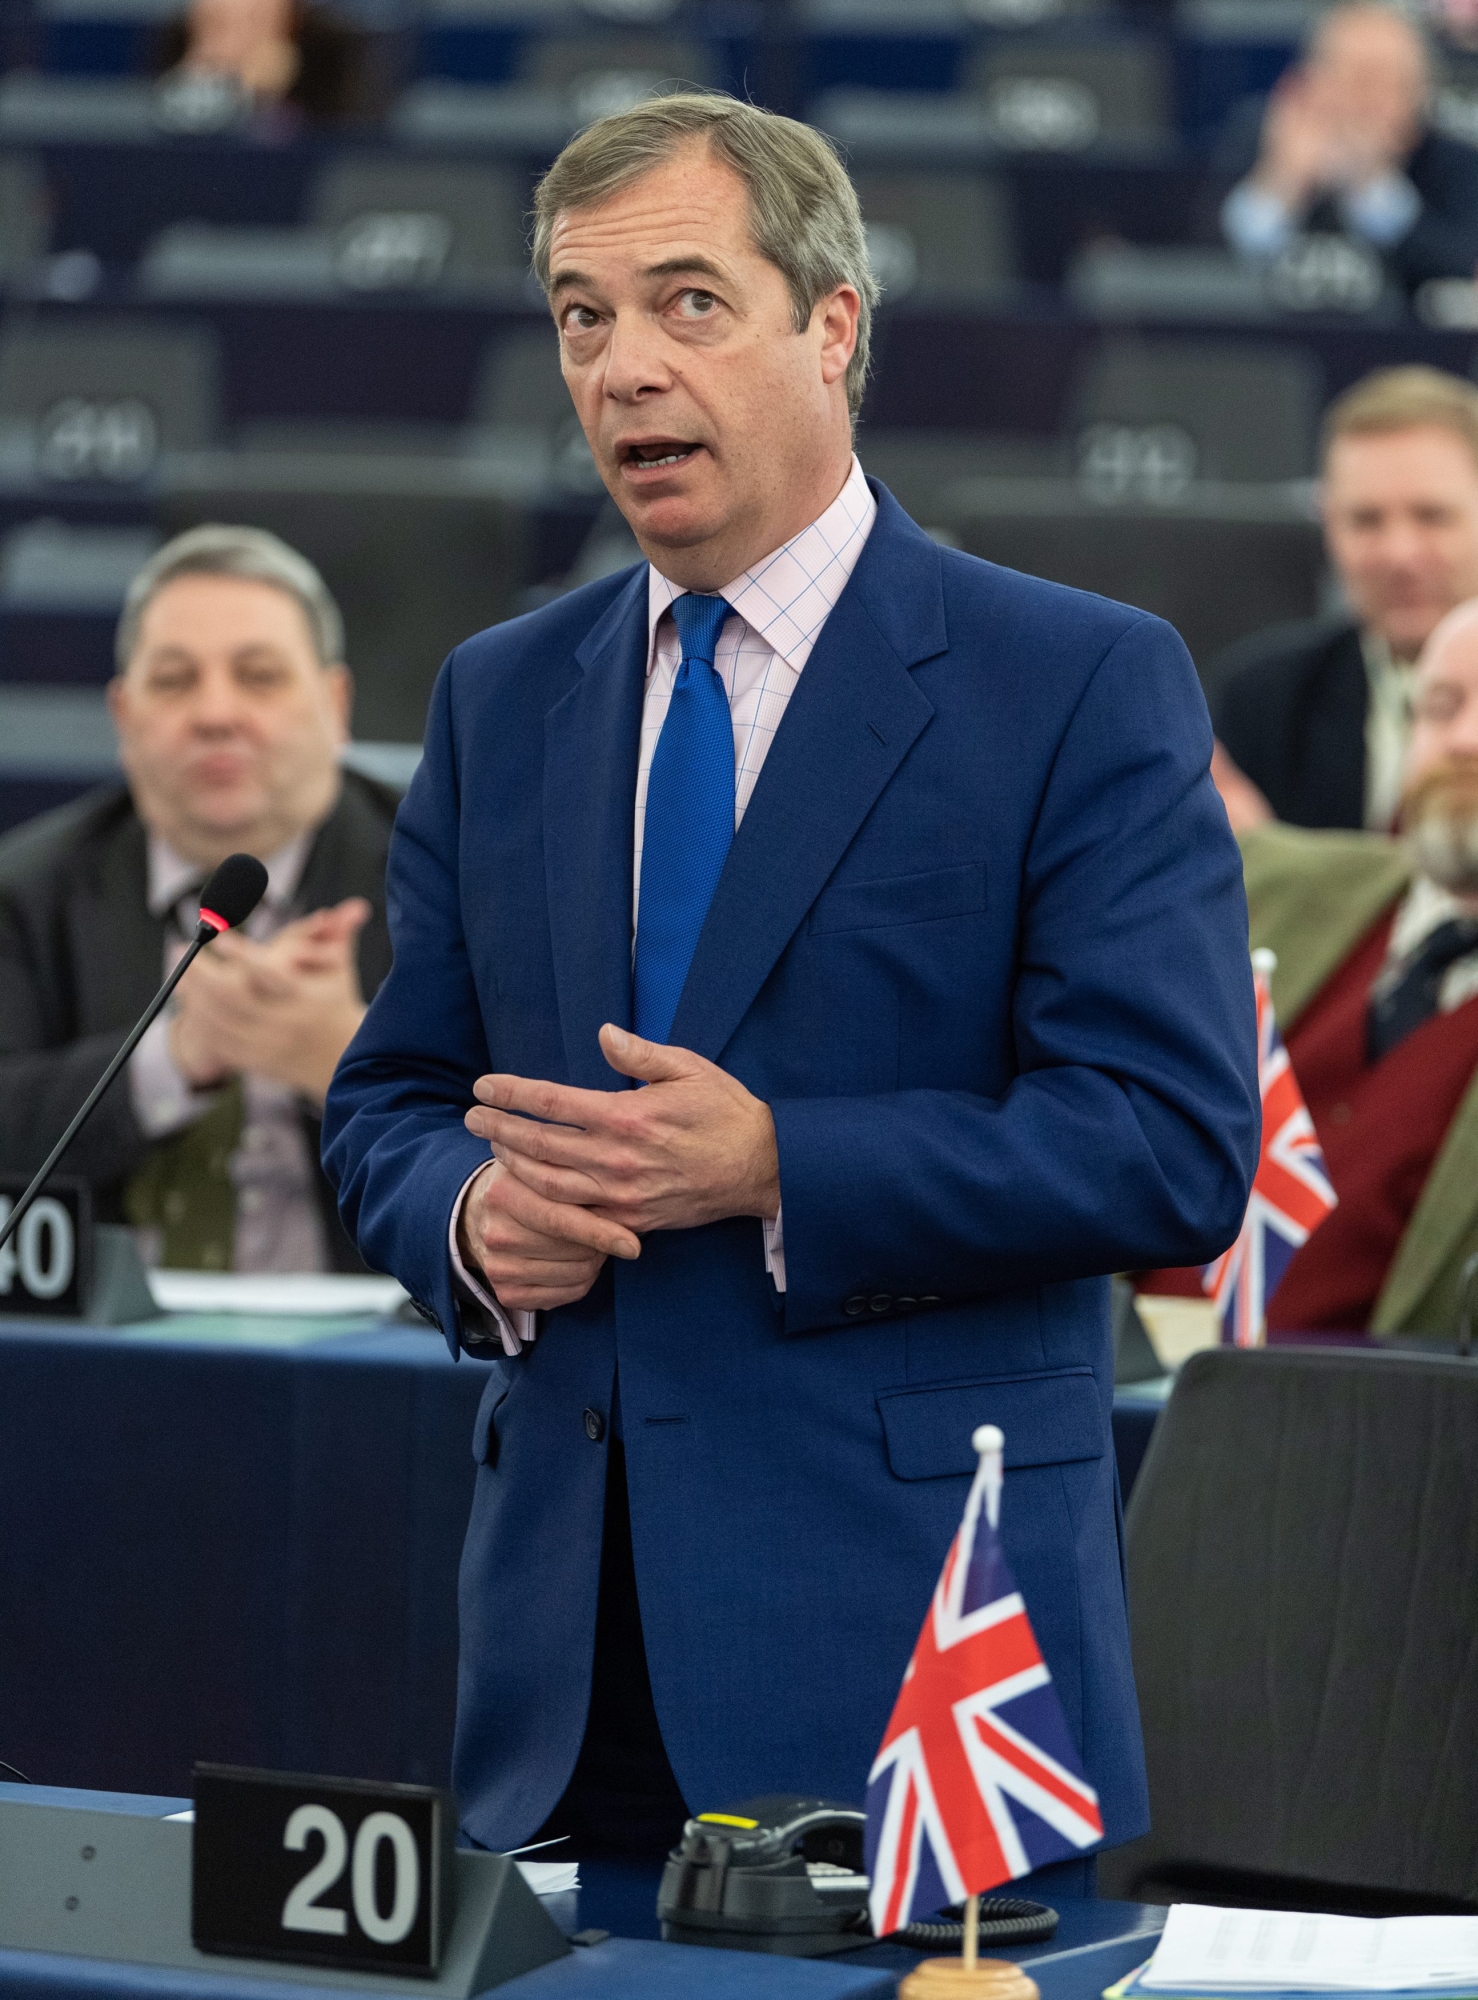 epa07433261 Nigel Farage, British Member of the European Parliament and former leader of the UK Independence Party (UKIP) delivers his speech during the debate on UKÄôs withdrawal from the EU in Strasbourg, France, 13 March 2019. British MPs will vote later in the day on whether to block the UK from leaving the EU without a deal on 29 March, after again rejecting the PM's withdrawal agreement on 12 March. The United Kingdom is officially due to leave the European Union on 29 March 2019, two years after triggering Article 50 in consequence to a referendum.  EPA/PATRICK SEEGER FRANCE EU PARLIAMENT